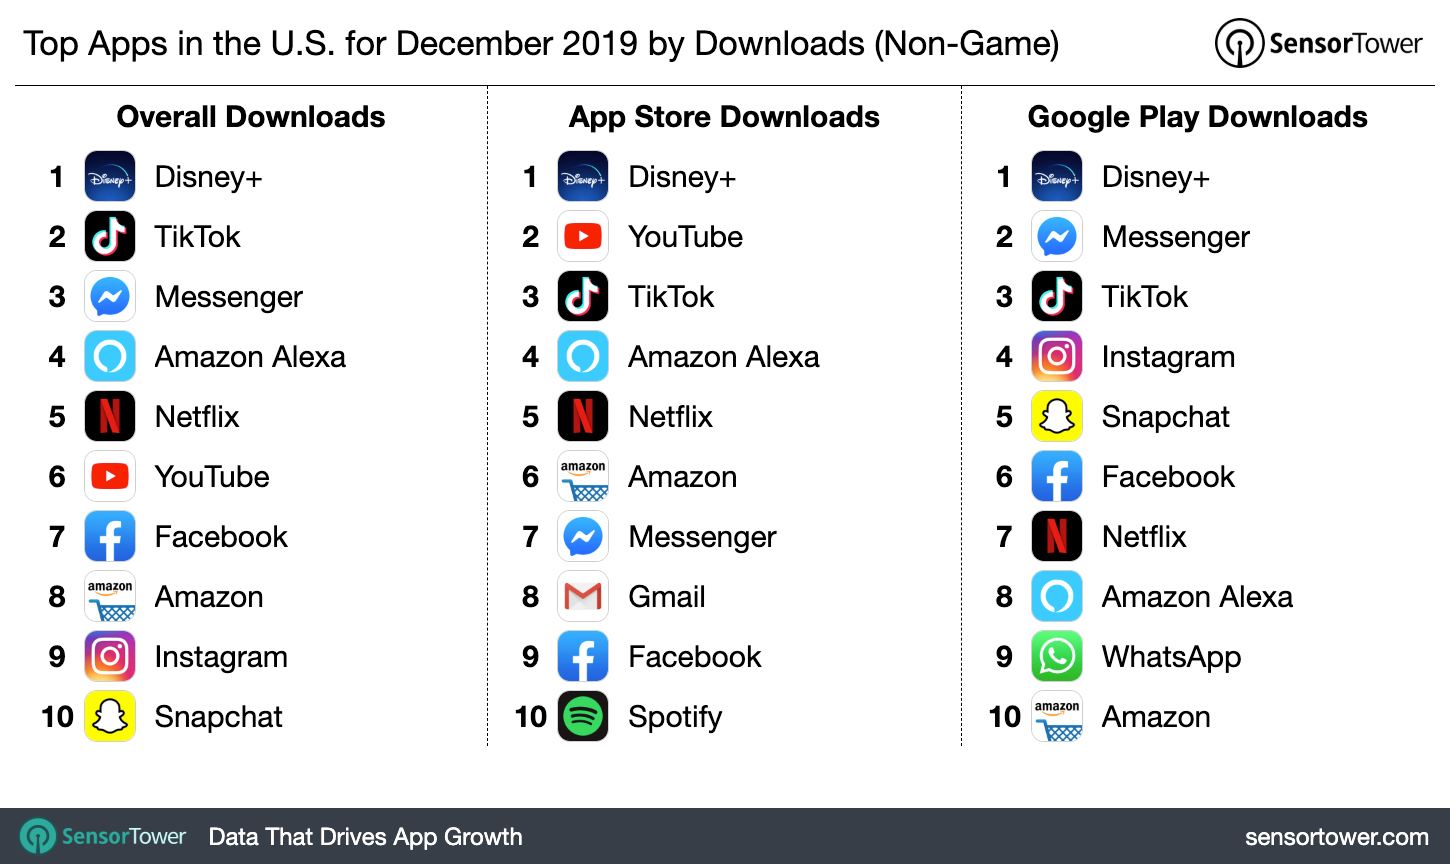 Top Apps in the U.S. for December 2019 by Downloads